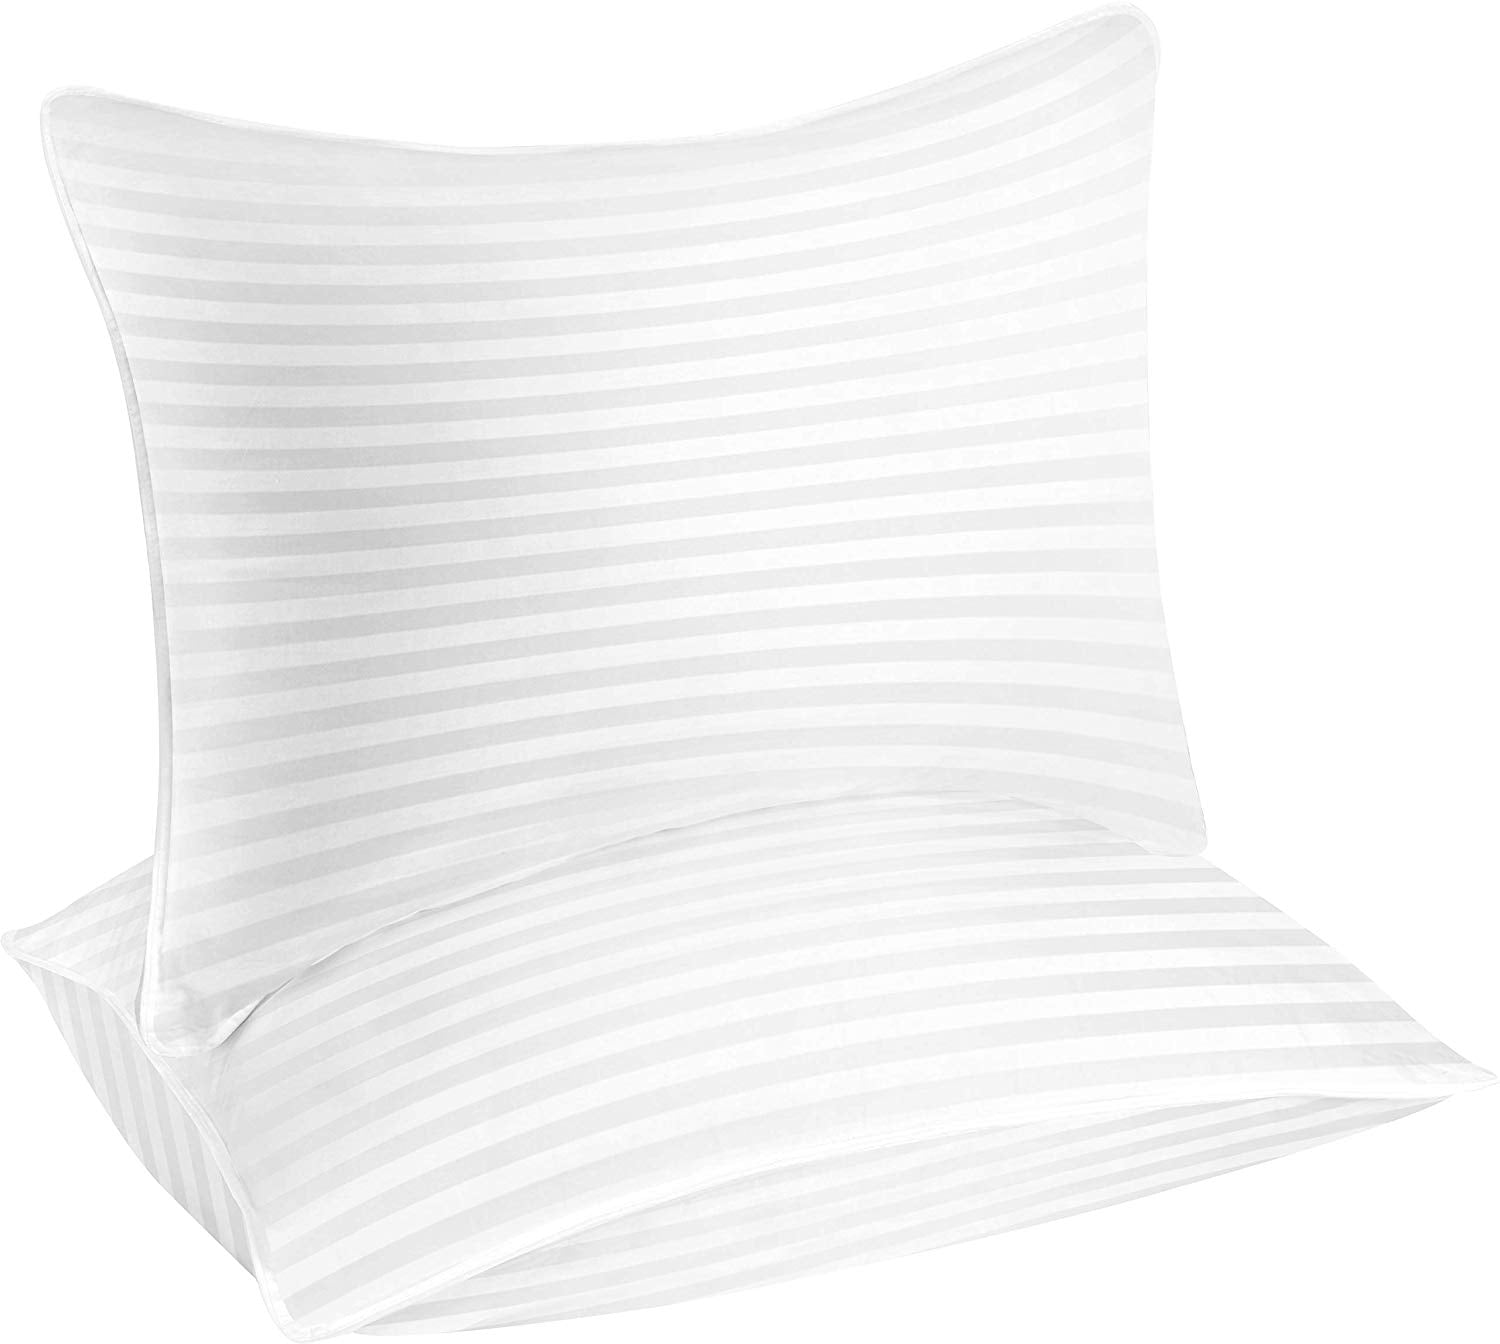 Utopia Bedding Bed Pillows for Sleeping King Size (White), Set of 2,  Cooling Hotel Quality, for Back, Stomach or Side Sleepers